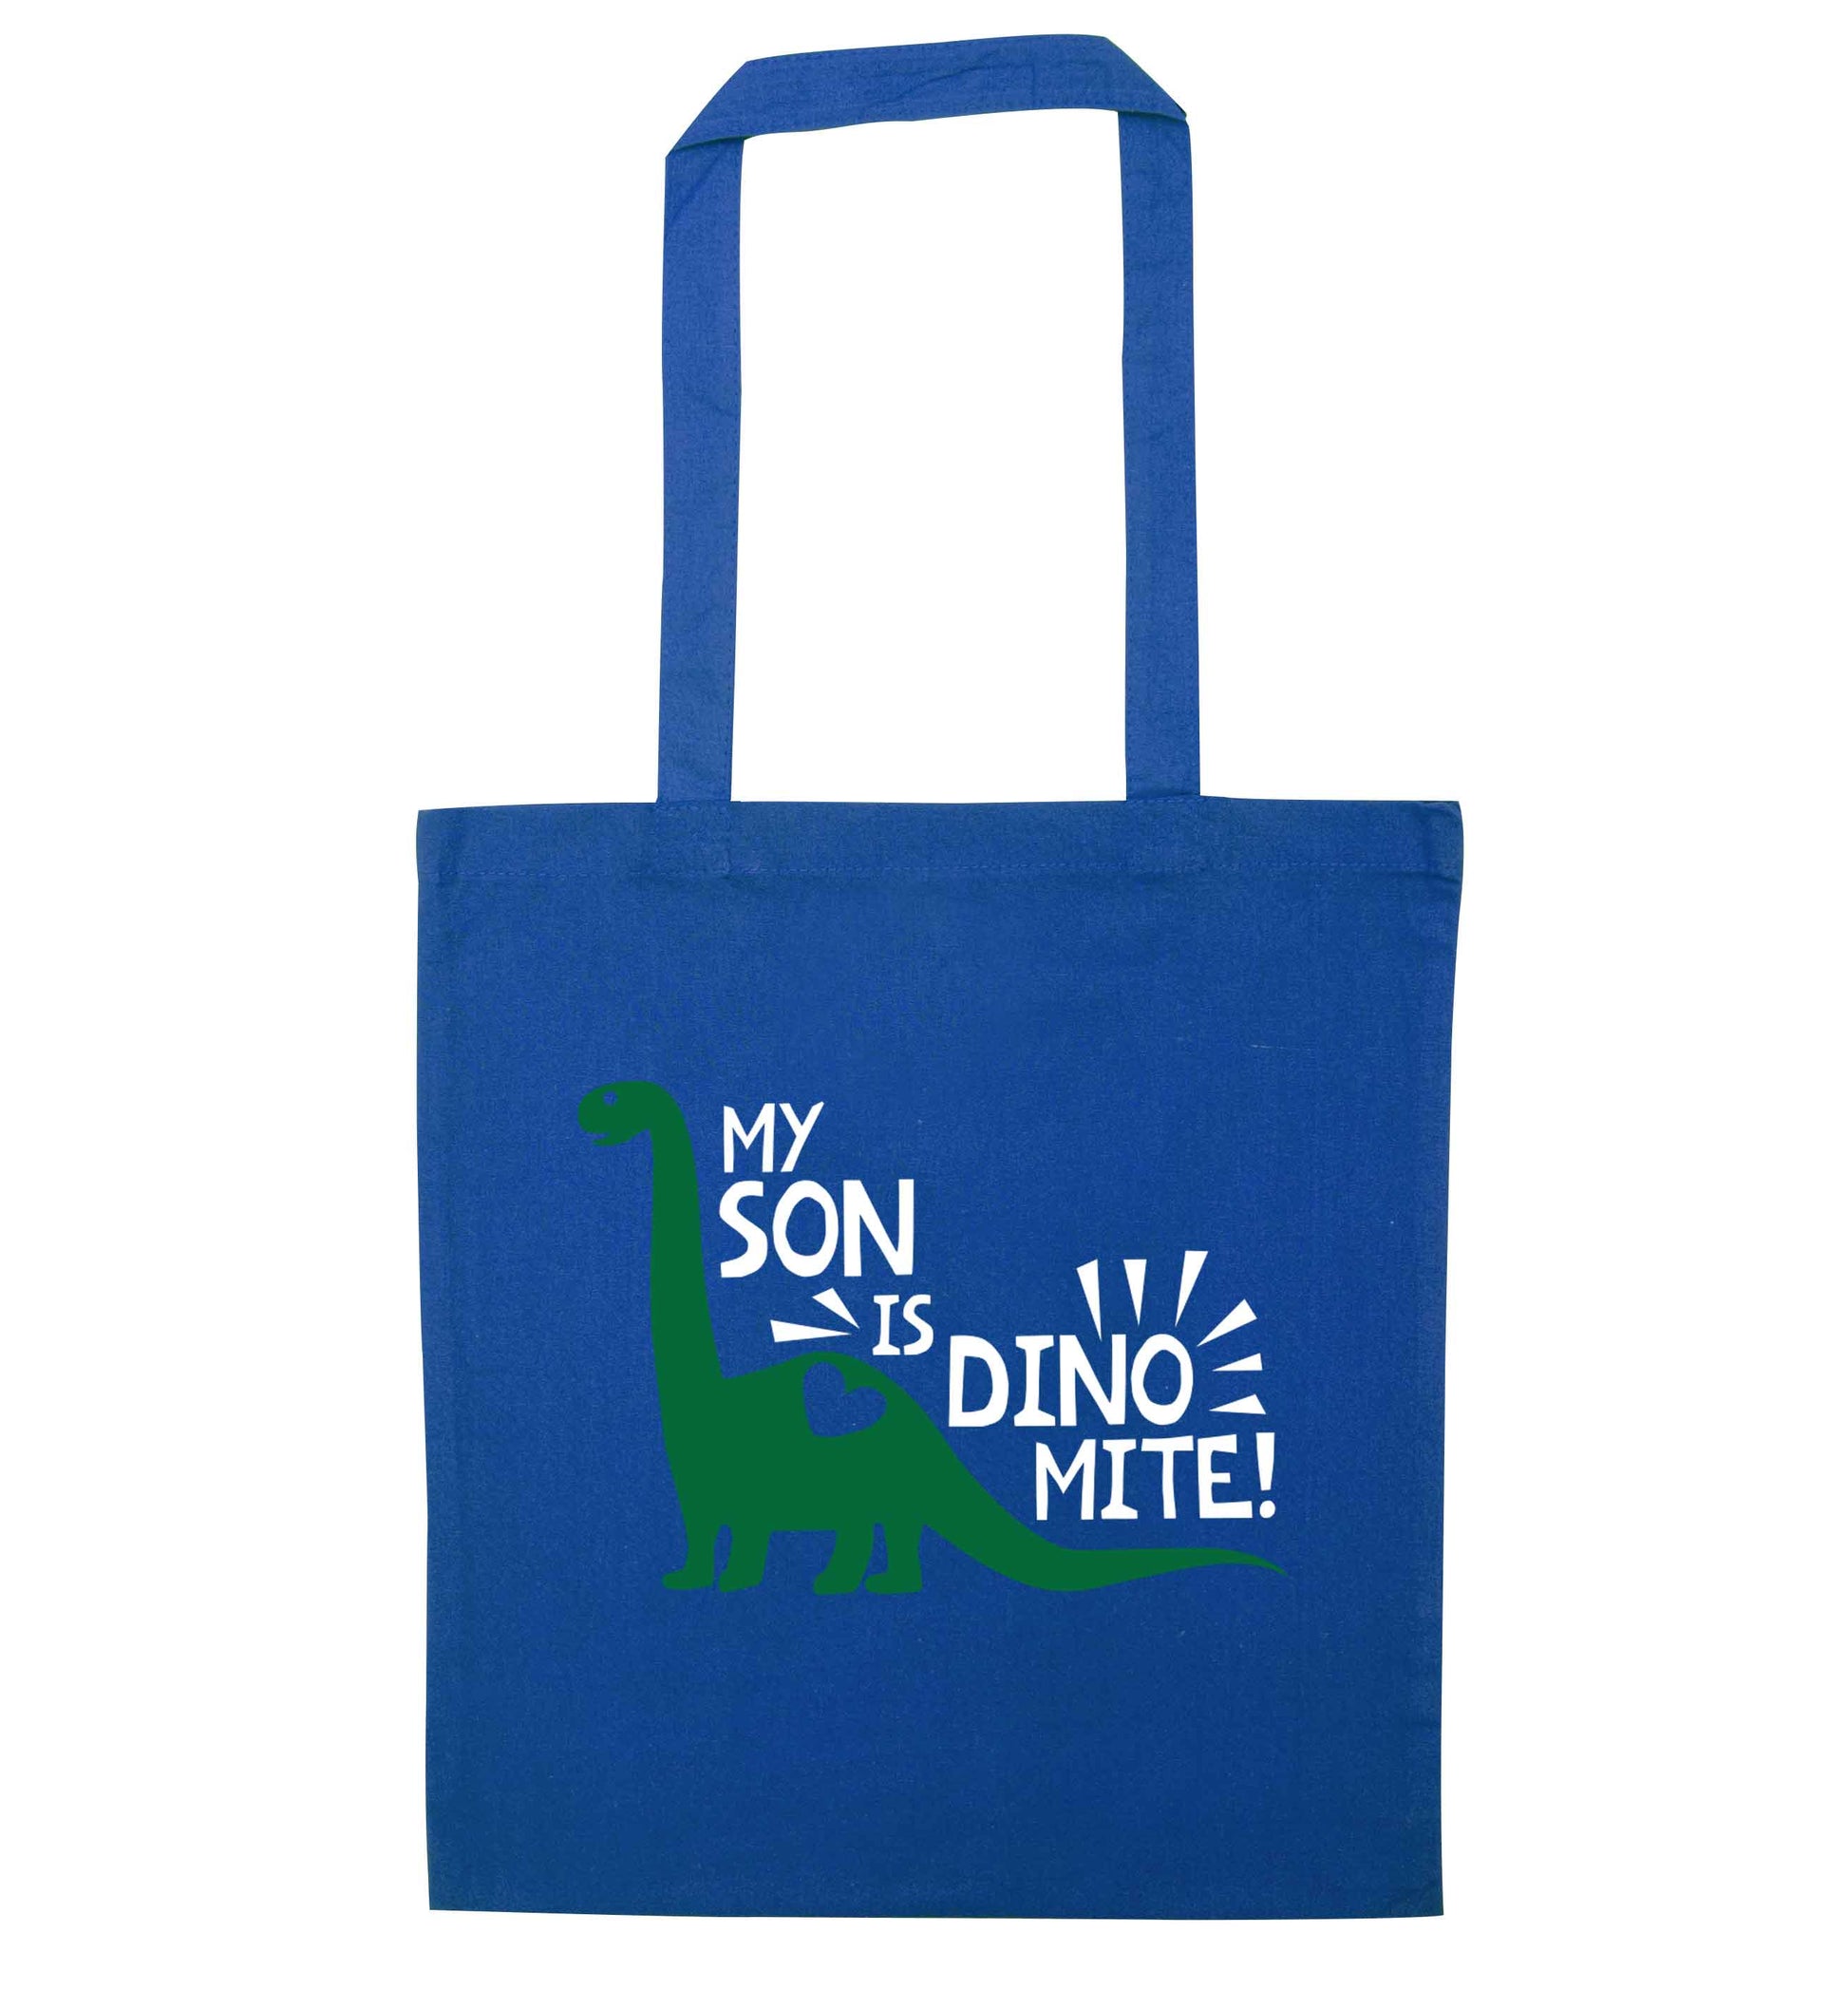 My son is dinomite! blue tote bag